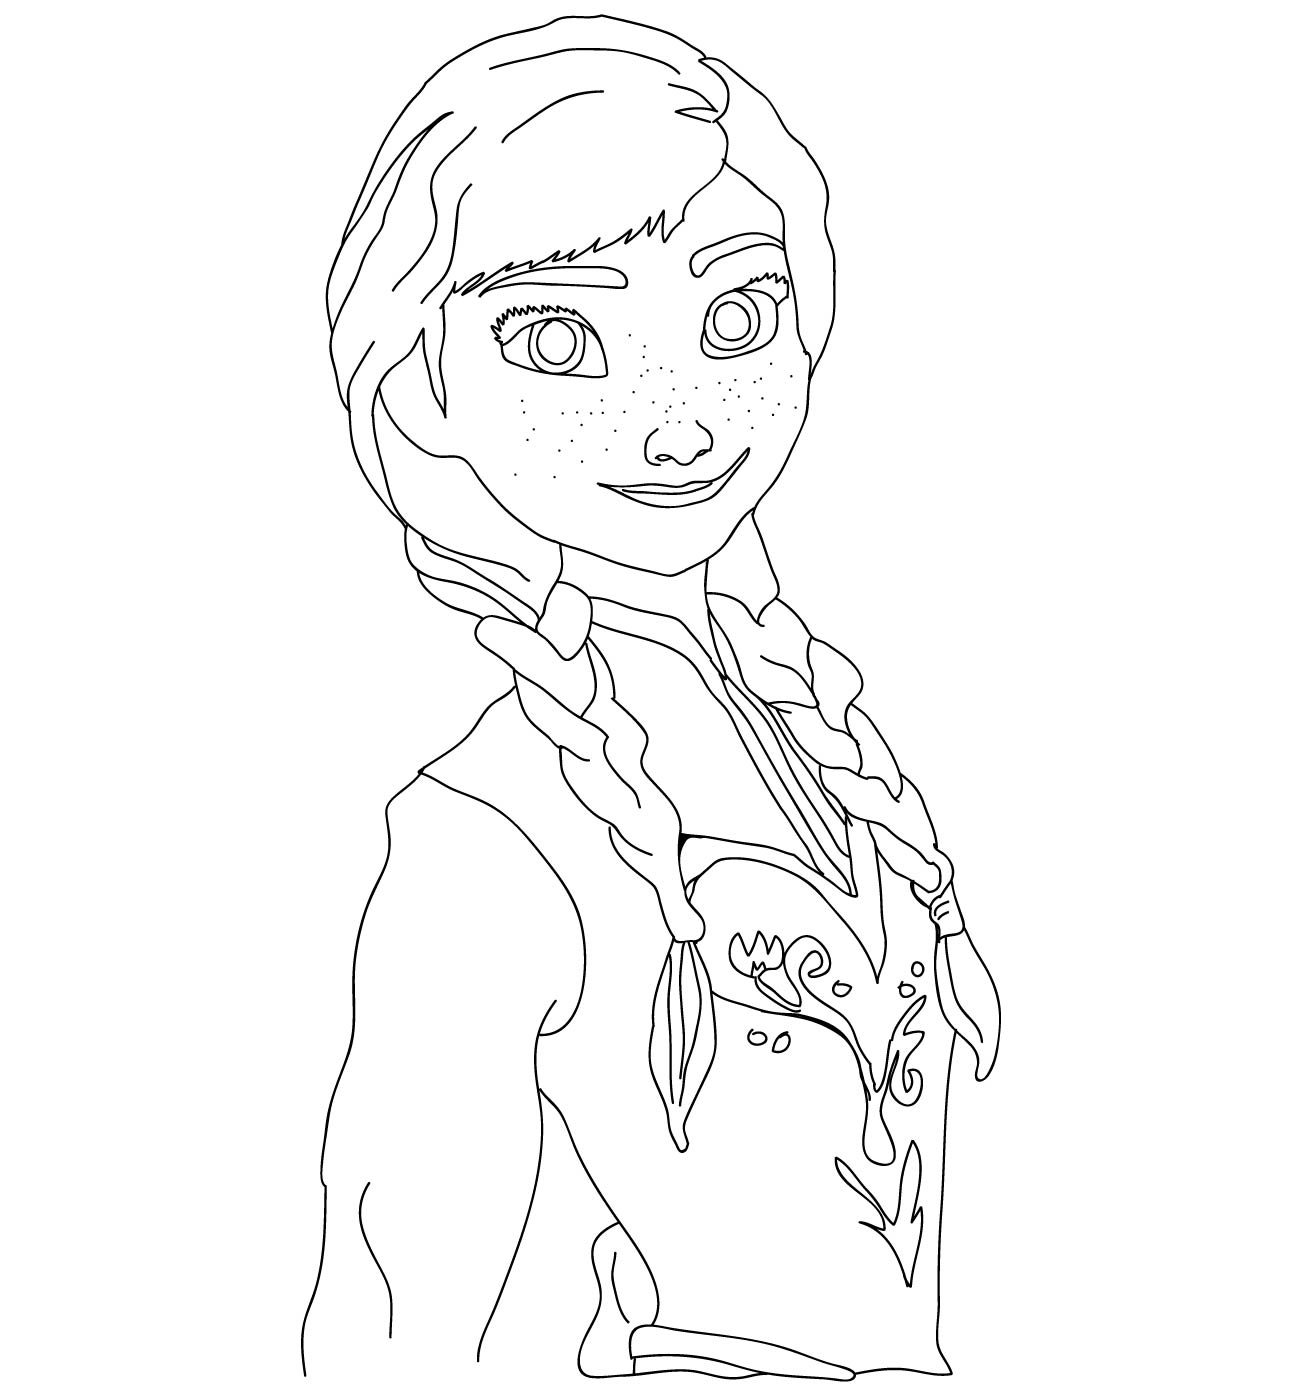 Anna Of Arendelle coloring page